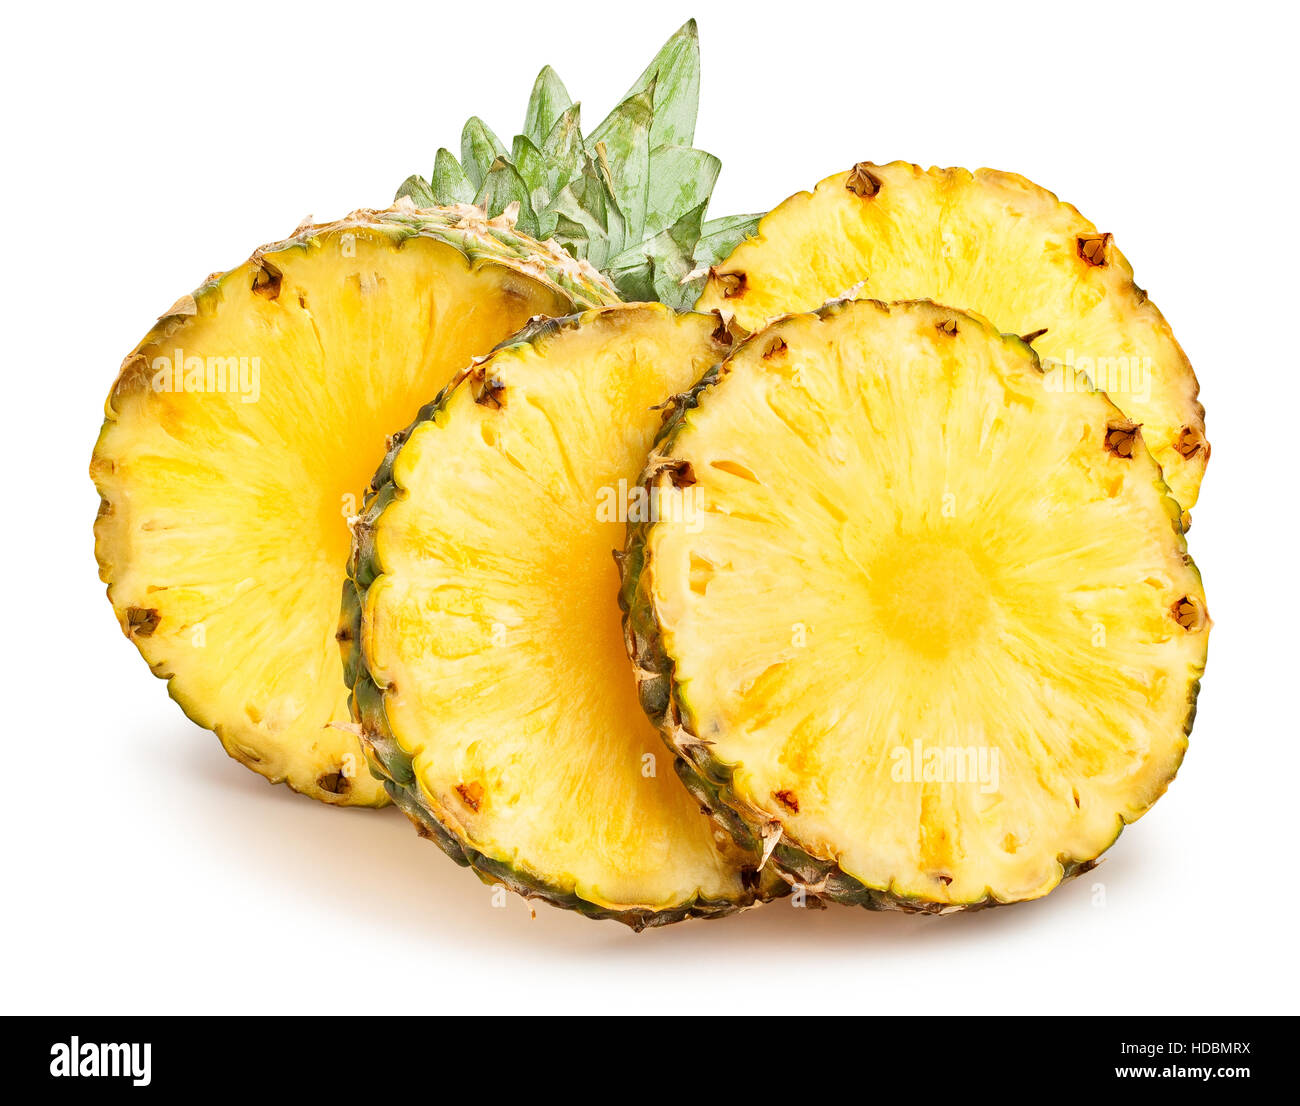 sliced pineapple isolated Stock Photo